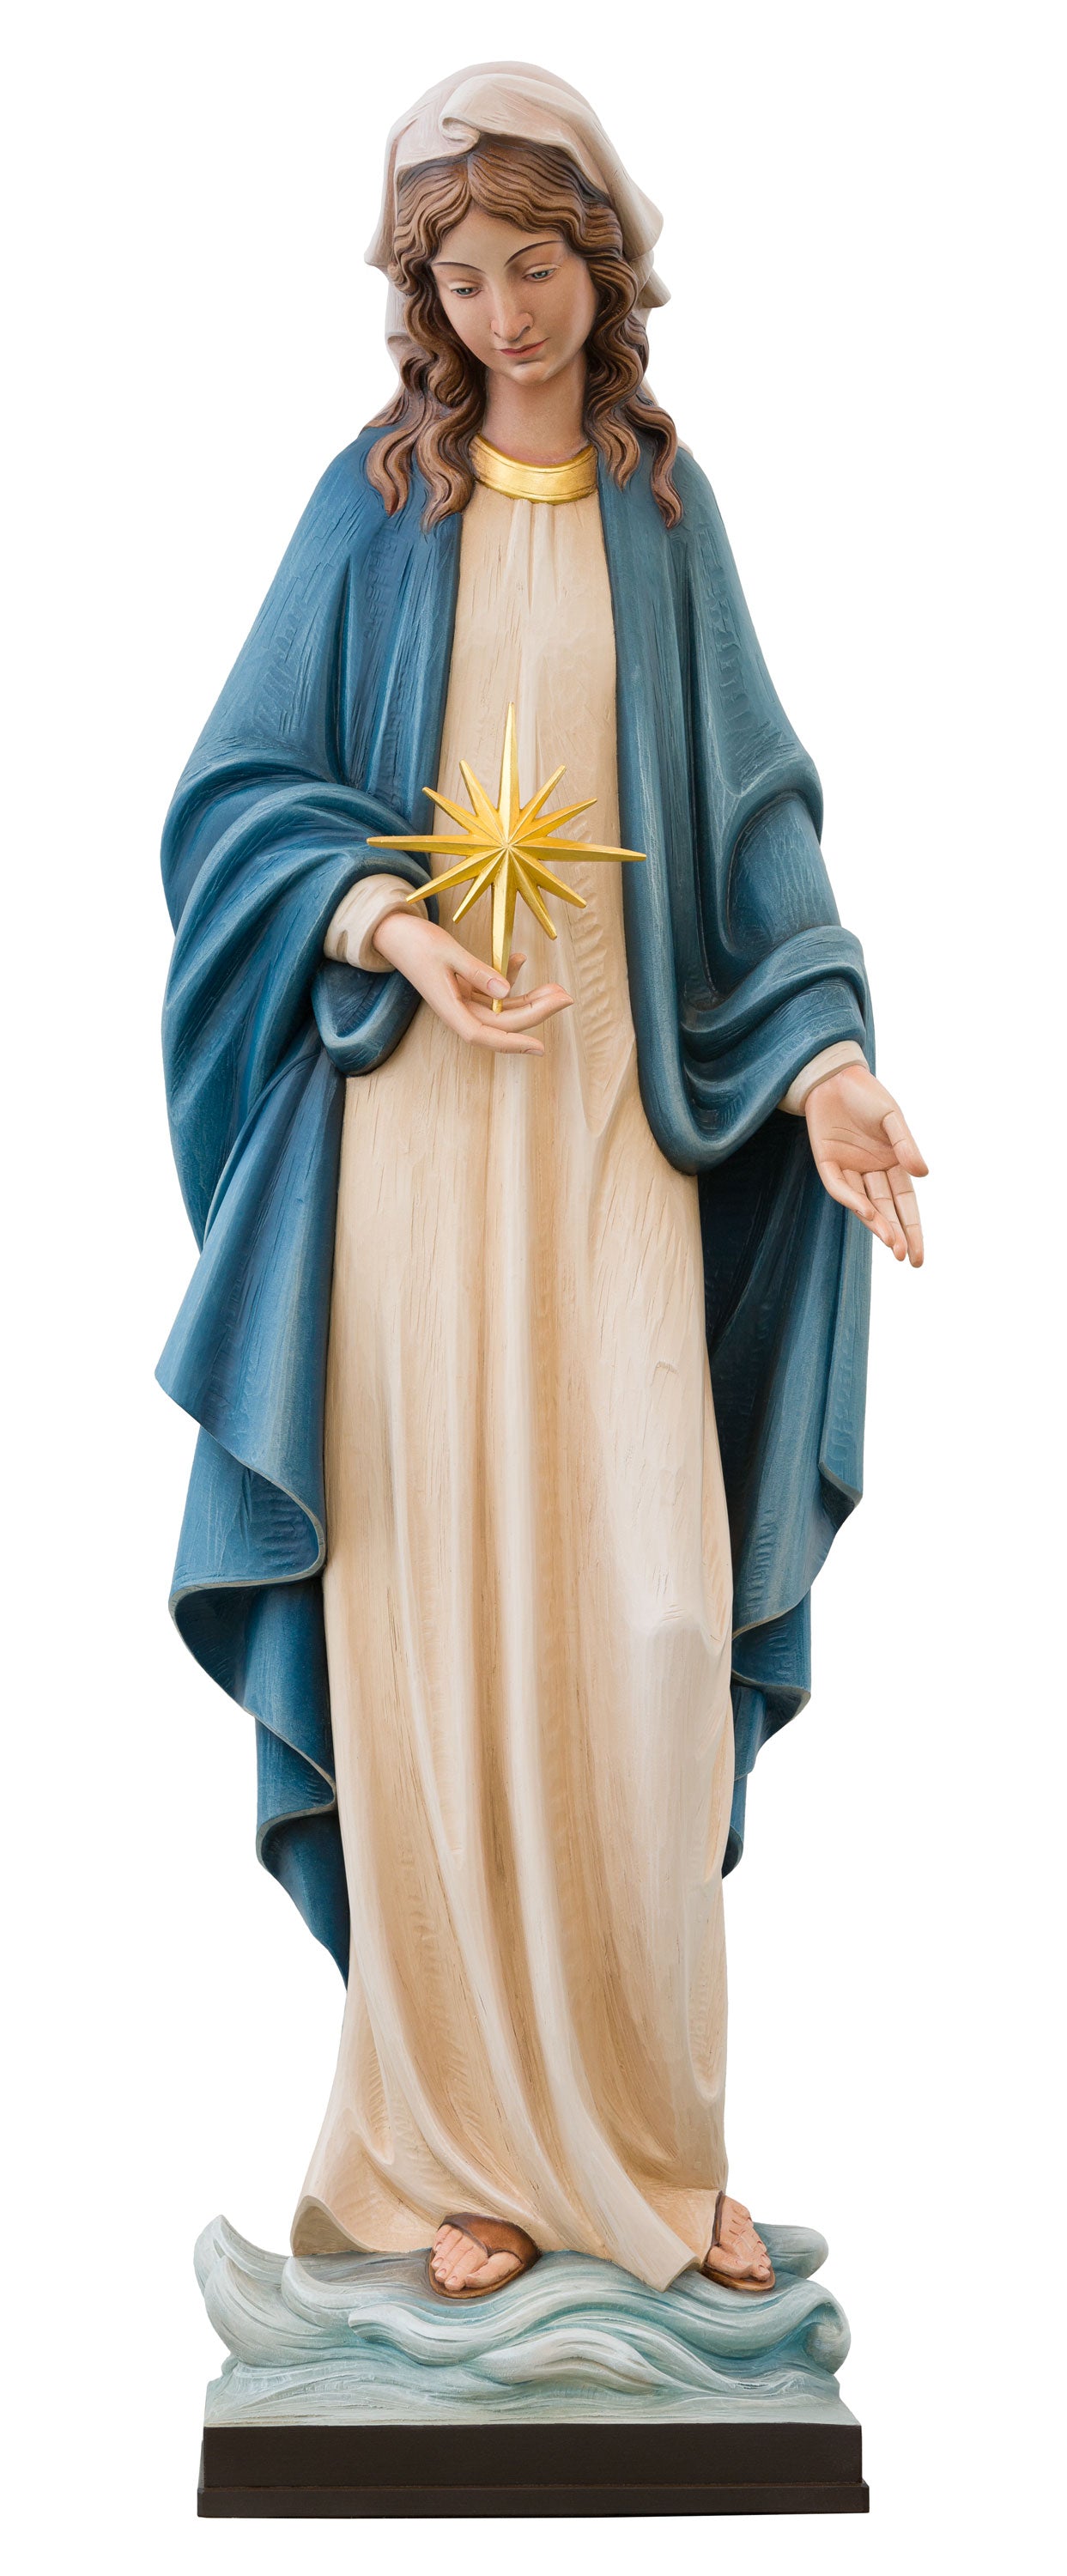 our-lady-star-of-the-sea-statue-640-78.jpg